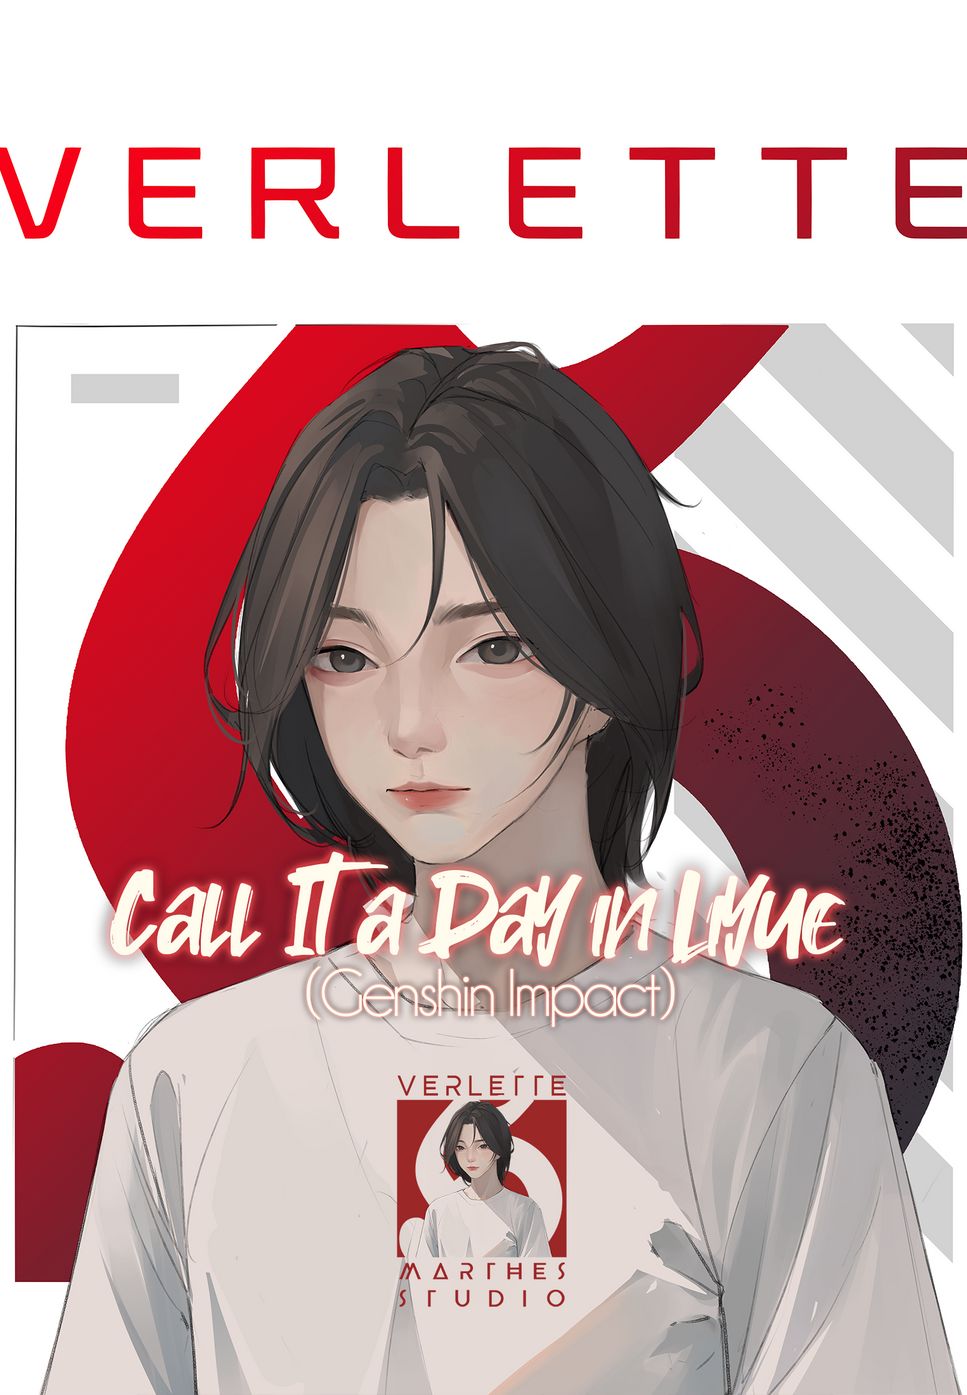 Genshin Impact - Call It a Day in Liyue by Verlette (Marthes Studio)